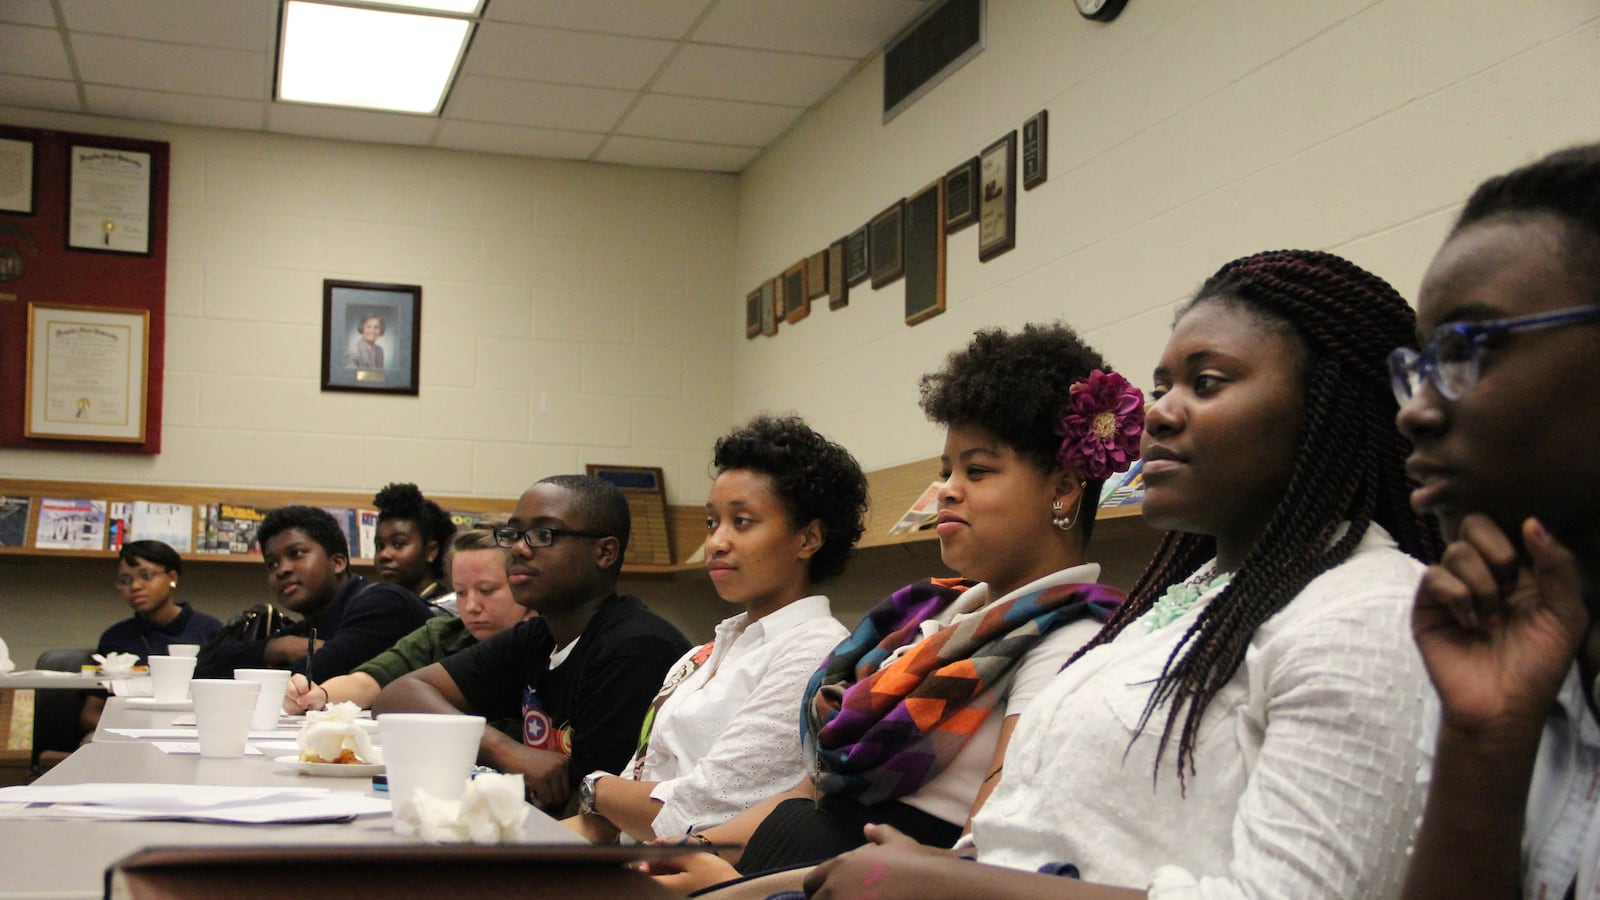 Student journalists with The Teen Appeal meet for their monthly editorial meeting on the campus of the University of Memphis.